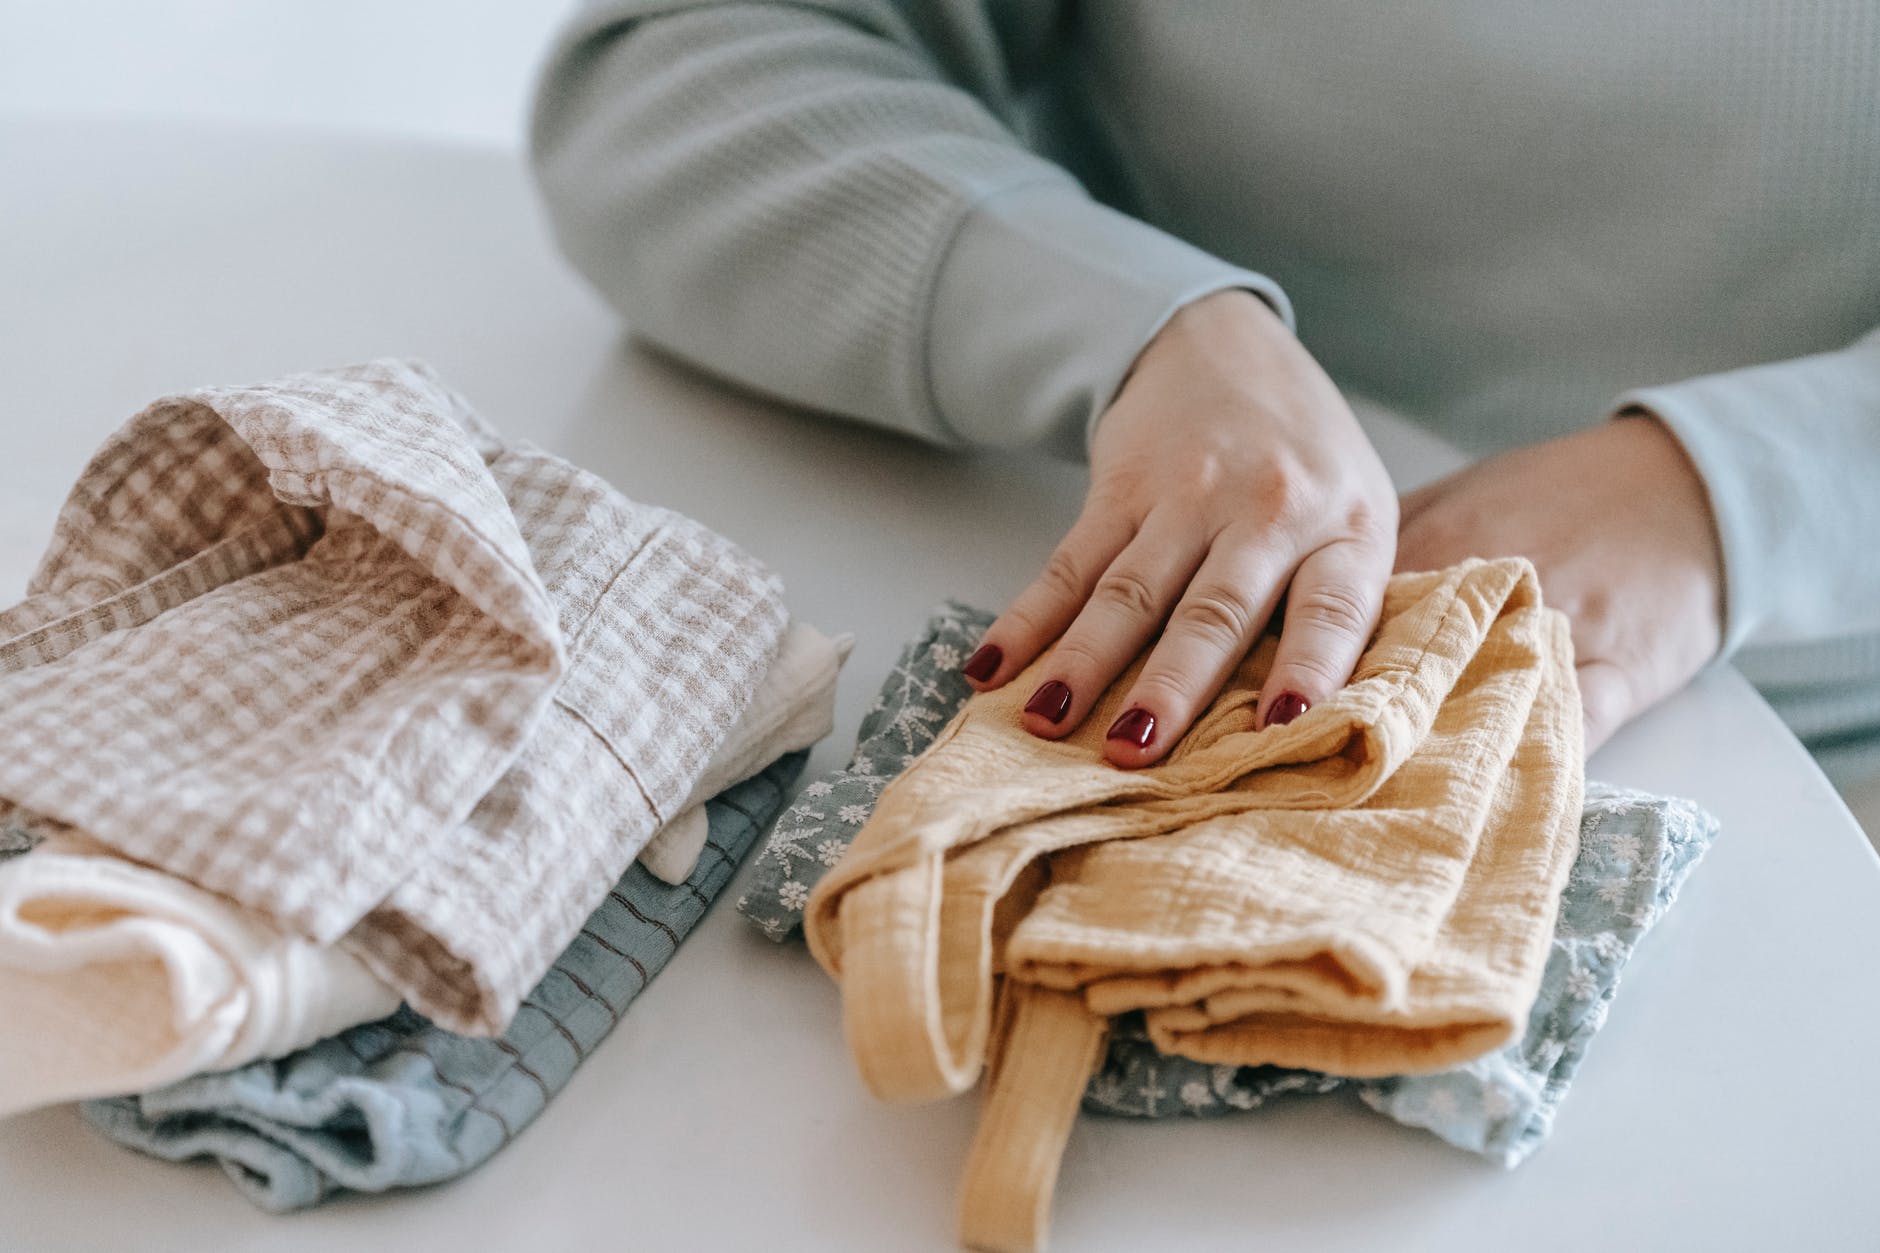 Patricia was folding clothes while thinking of her difficult pregnancy.  | Source: Pexels